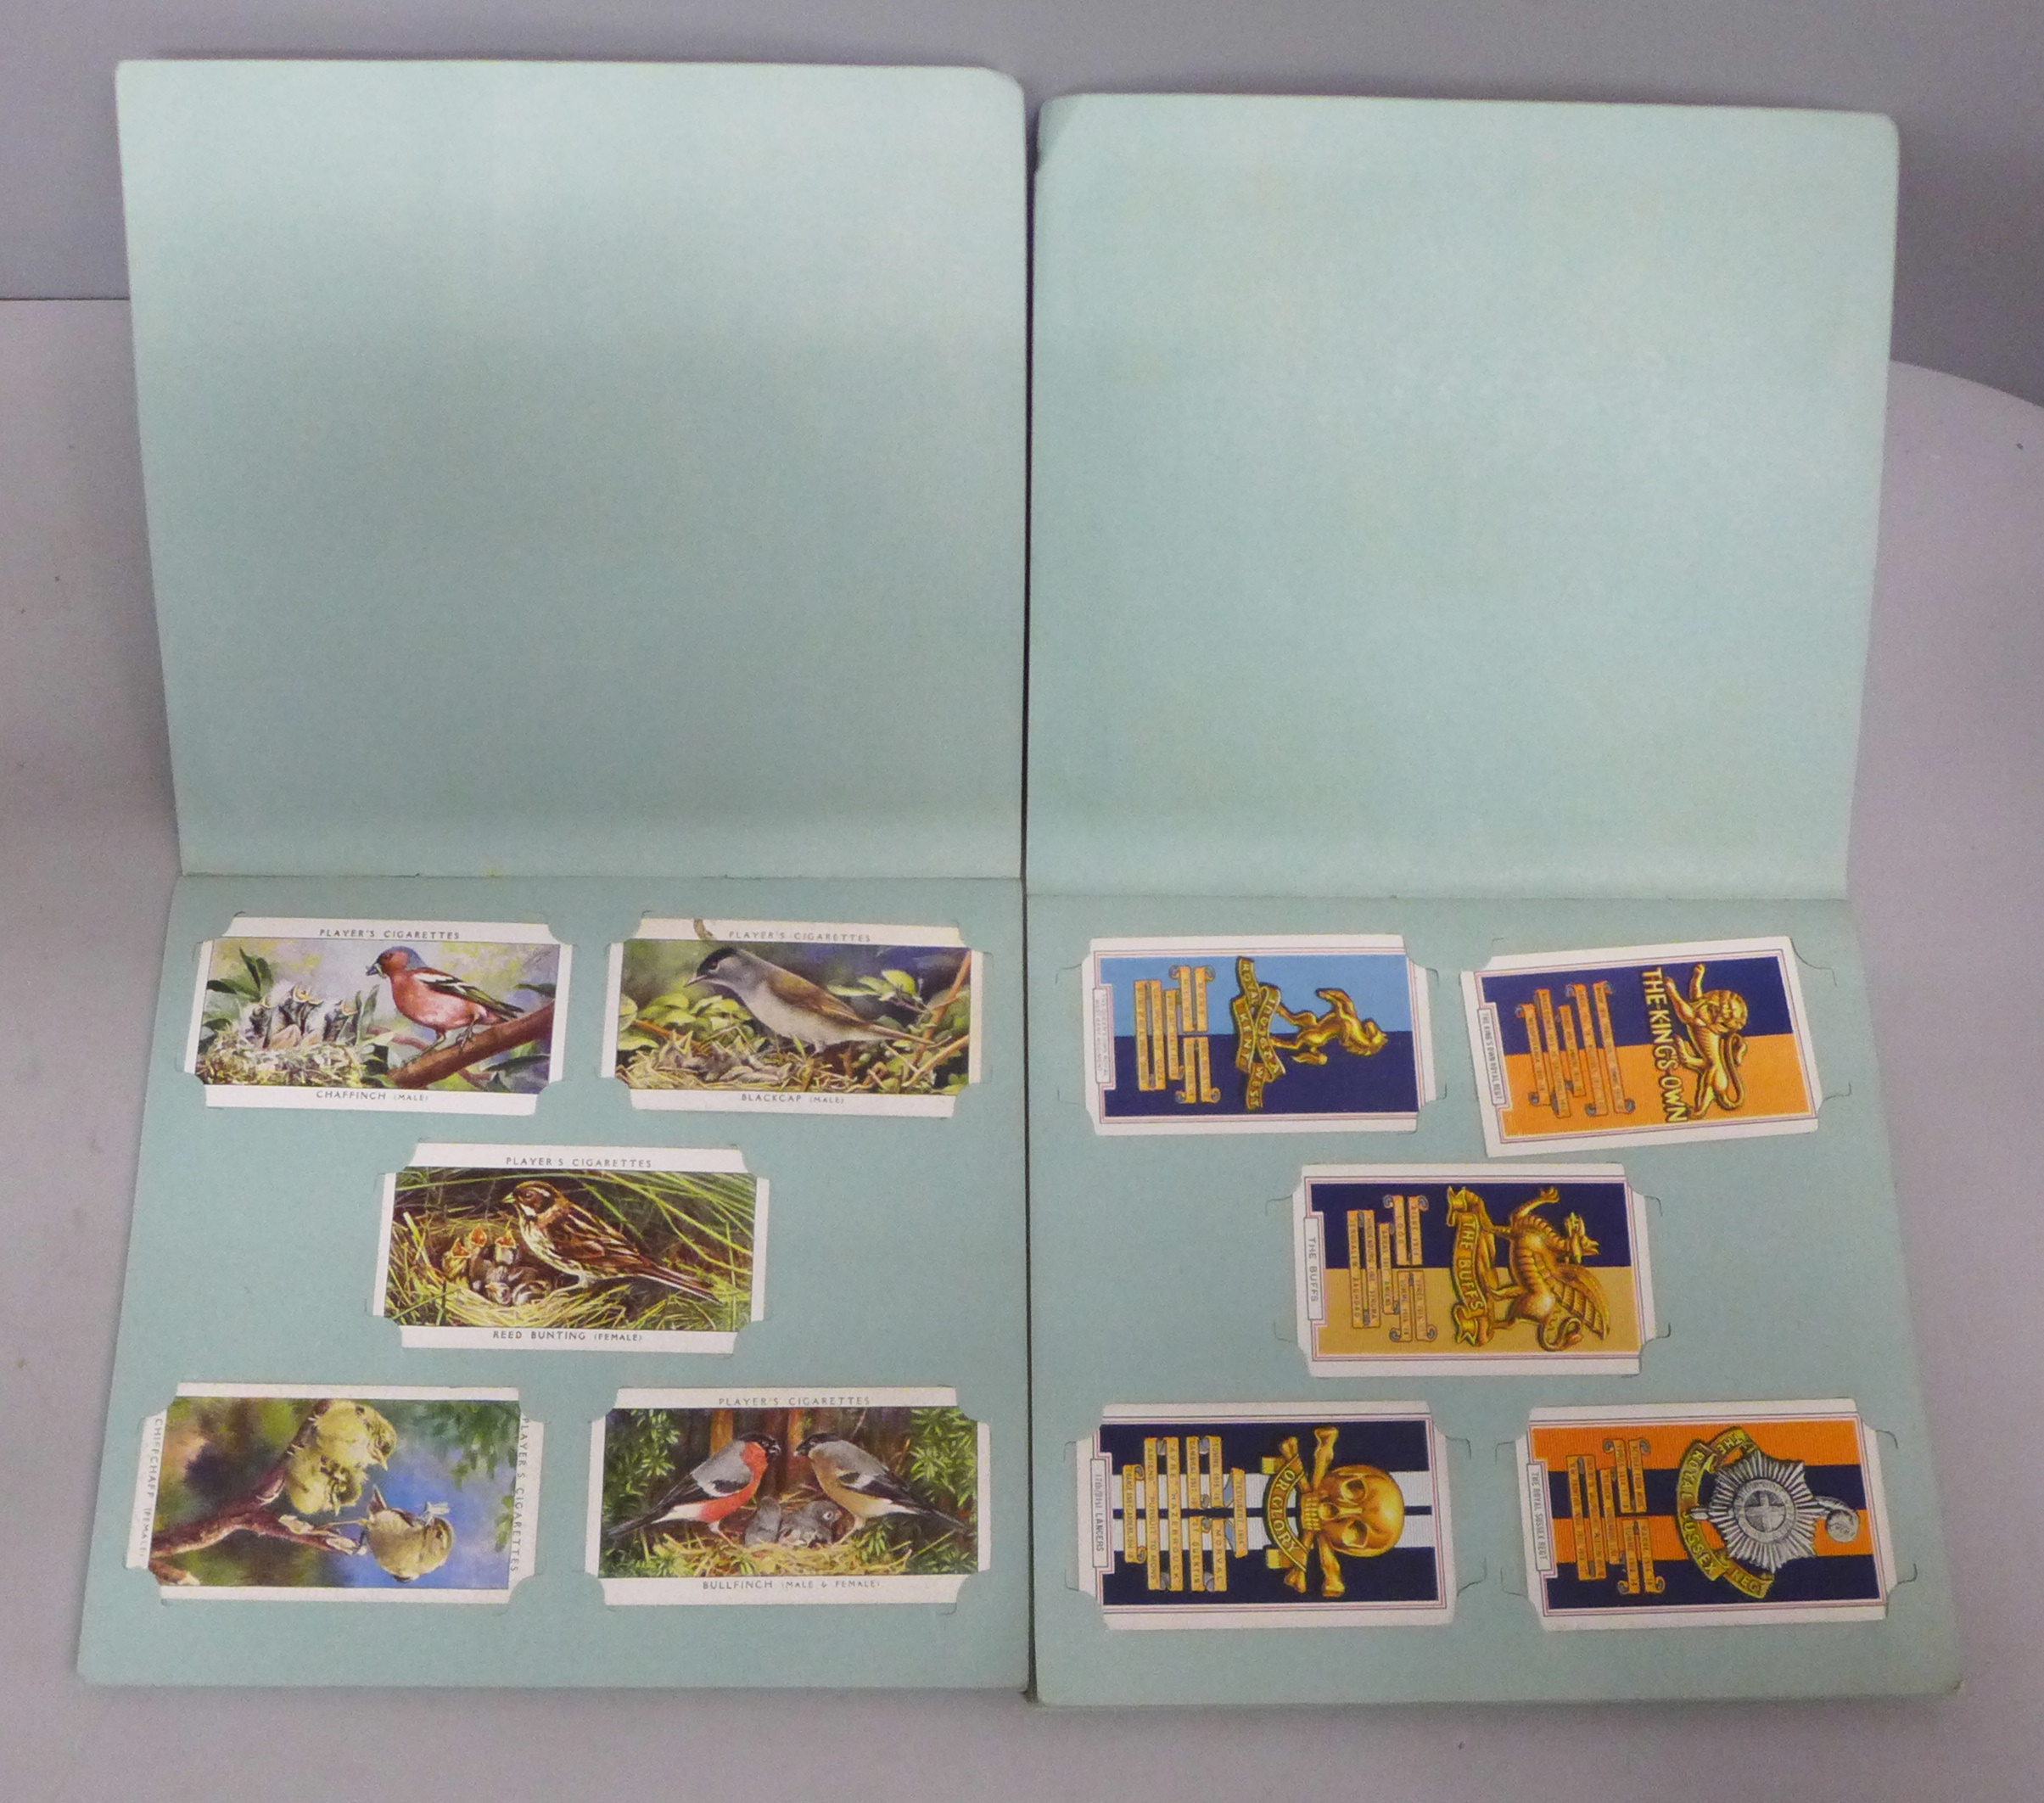 A Players cigarettes set of Birds cards in a picture album, Regimental crests cards in an album, - Image 7 of 11